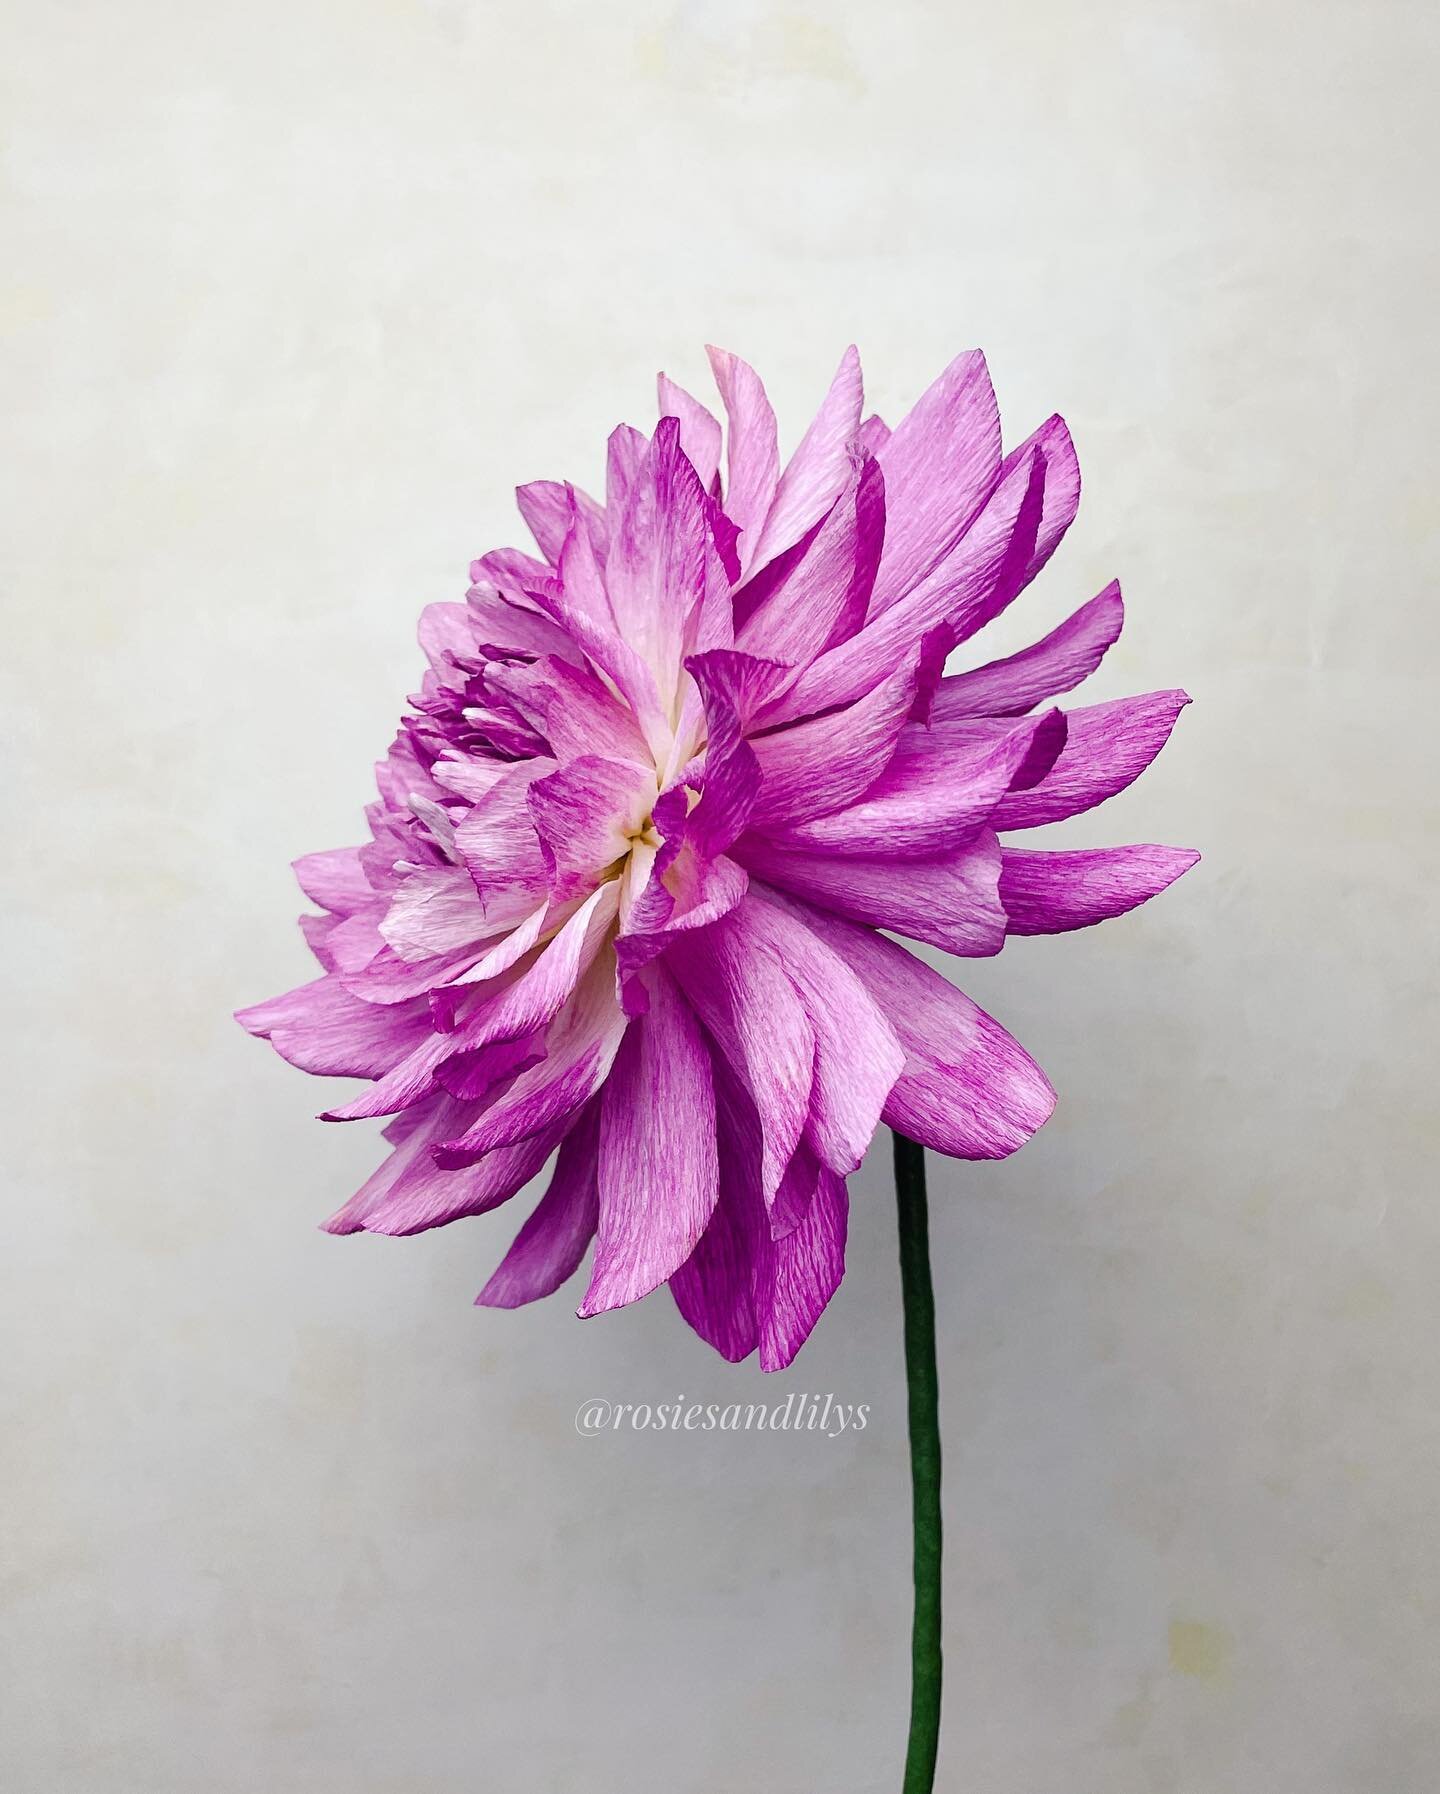 This is a gorgeous dahlia I was inspired to make. She&rsquo;s taught me how to play with different petal shaping techniques to find the right one for her. But I&rsquo;m glad I brought her to life. She was made with white German crepe paper, colored w